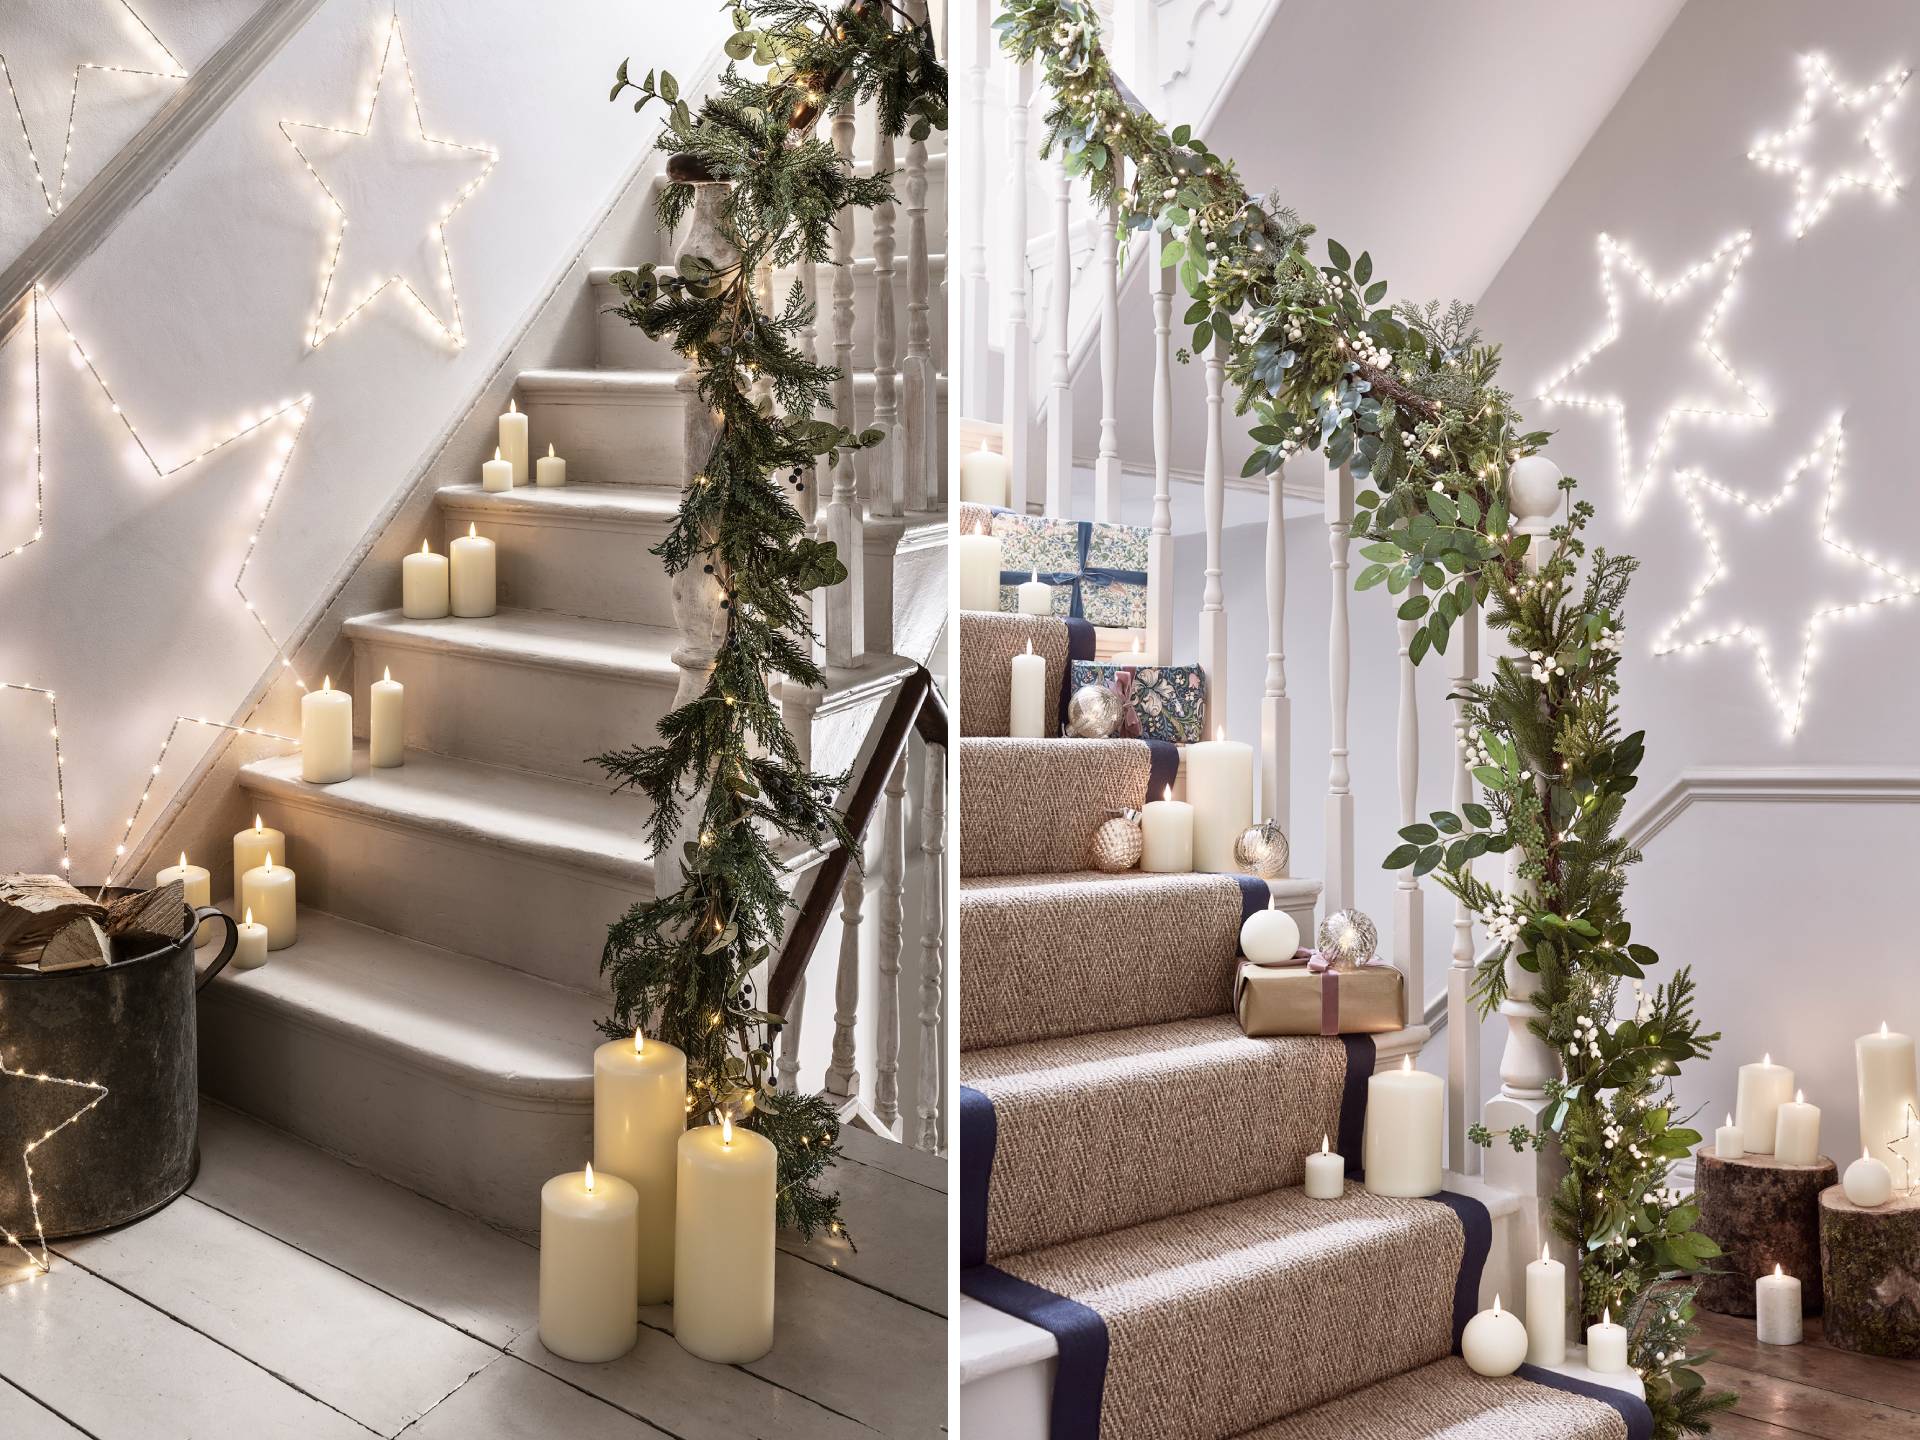 Two staircases with star lights and LED candles.